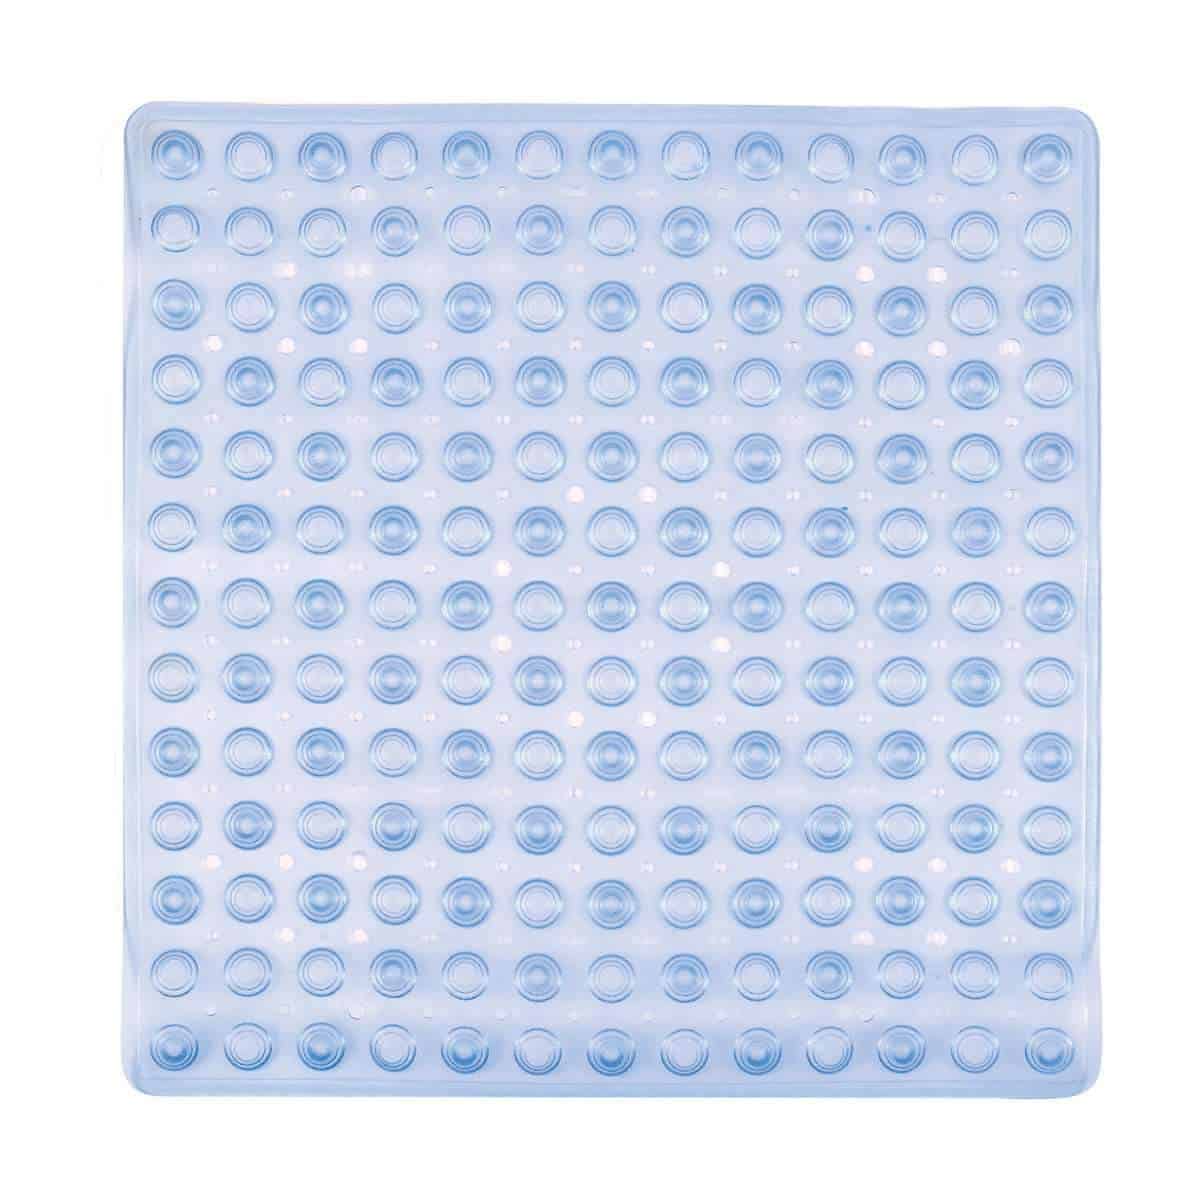 HealthSmart Extra Long Non-Slip Bath and Shower Mats - Several Colors